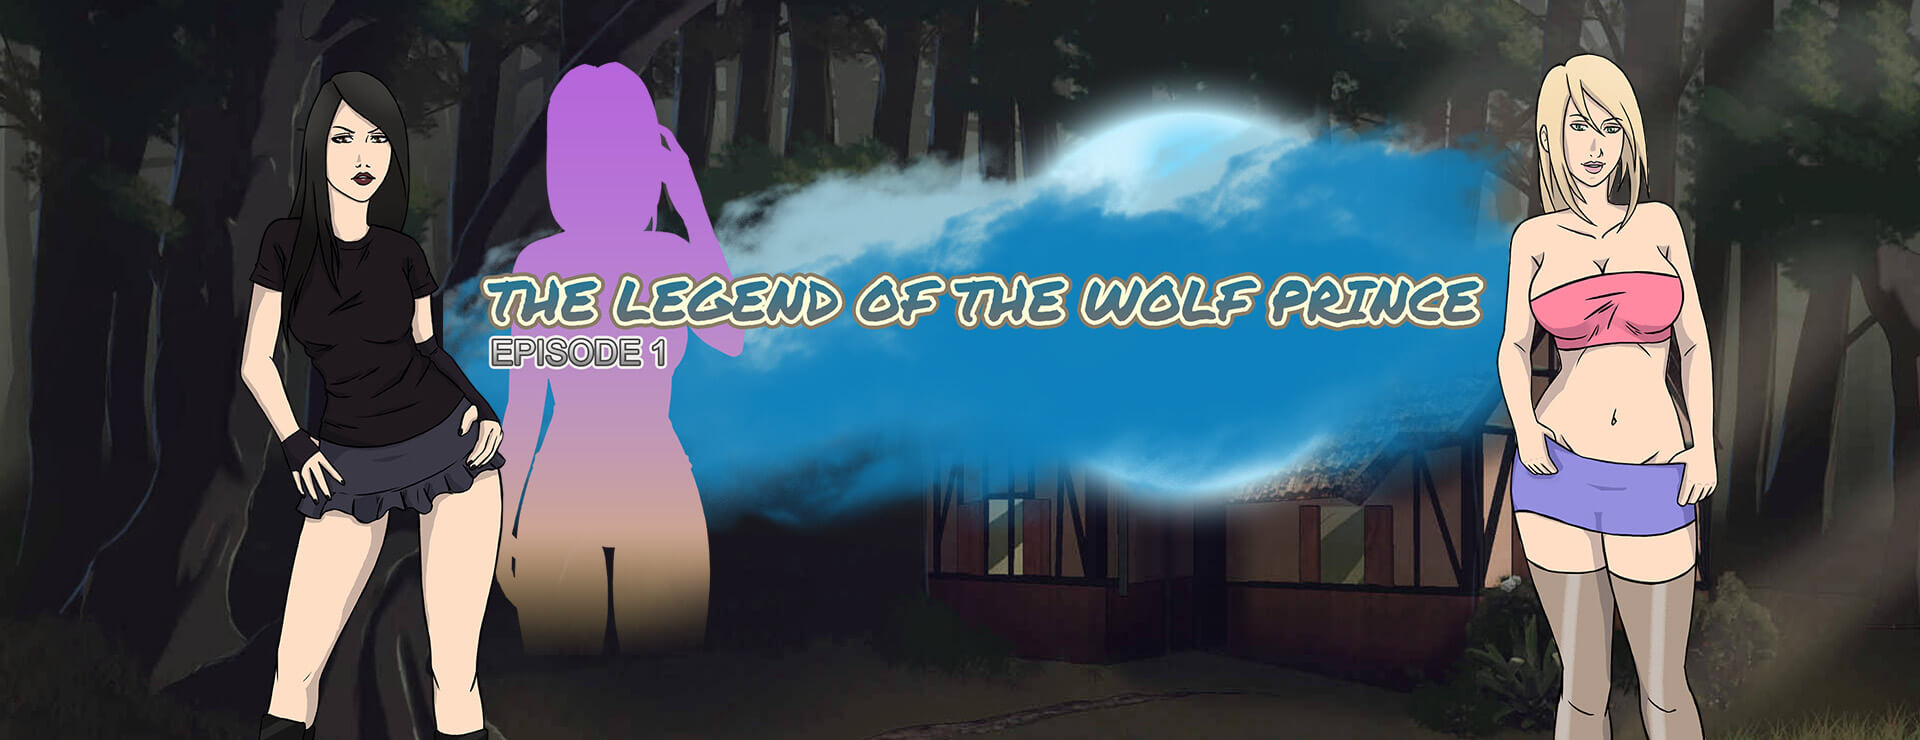 The Legend of the Wolf Prince - Episode 1 - 虚拟小说 遊戲